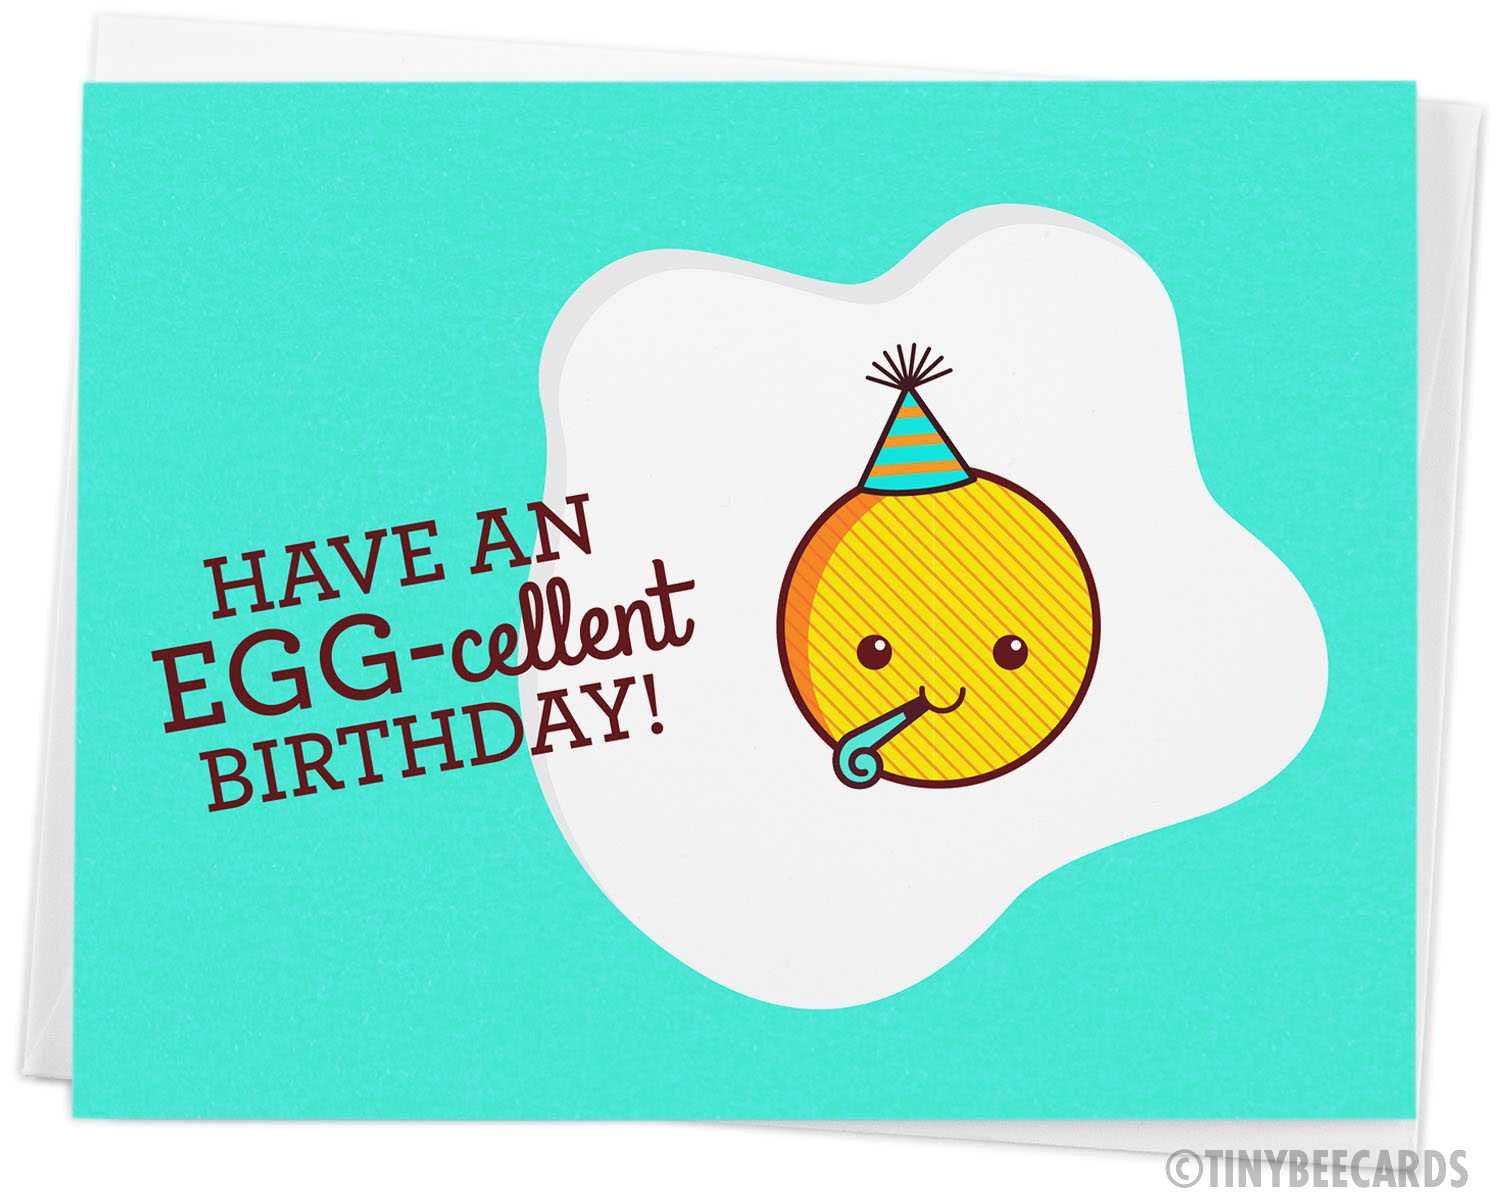 Pun Birthday Handcrafted Greeting Card "Have an EGG-cellent Birthday!" – TinyBeeCards